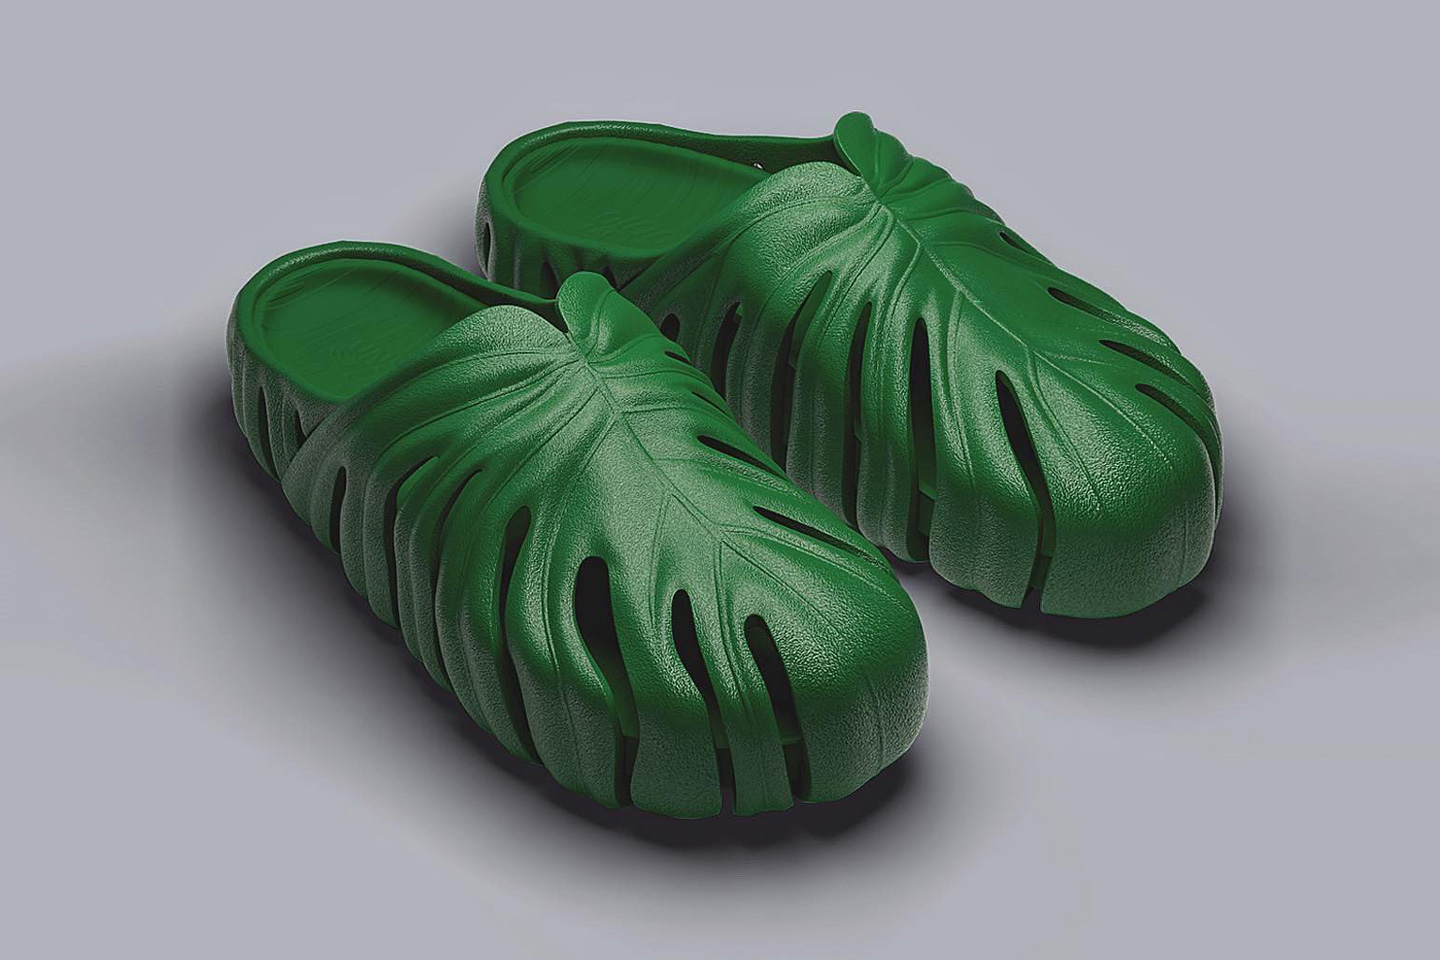 These Monstera sliders are an oddly satisfying example of nature-inspired  design - Yanko Design